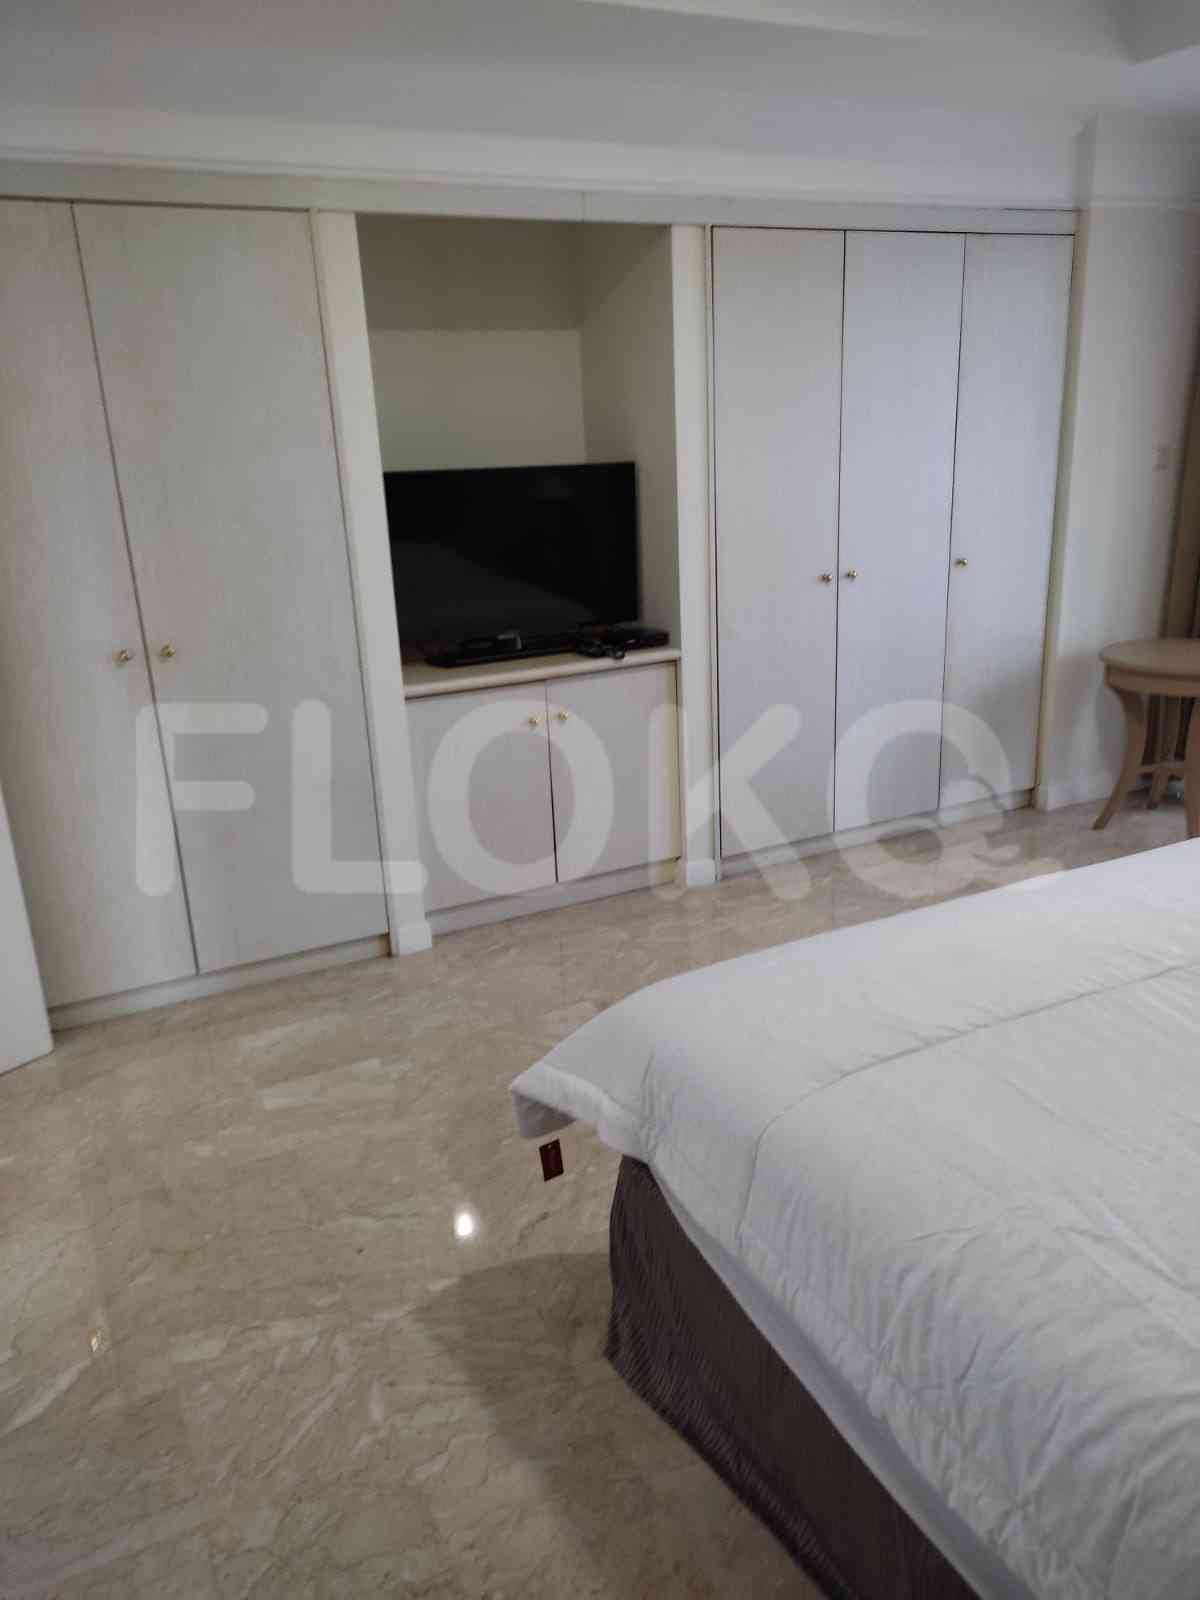 3 Bedroom on 3rd Floor for Rent in Golfhill Terrace Apartment - fpo482 5